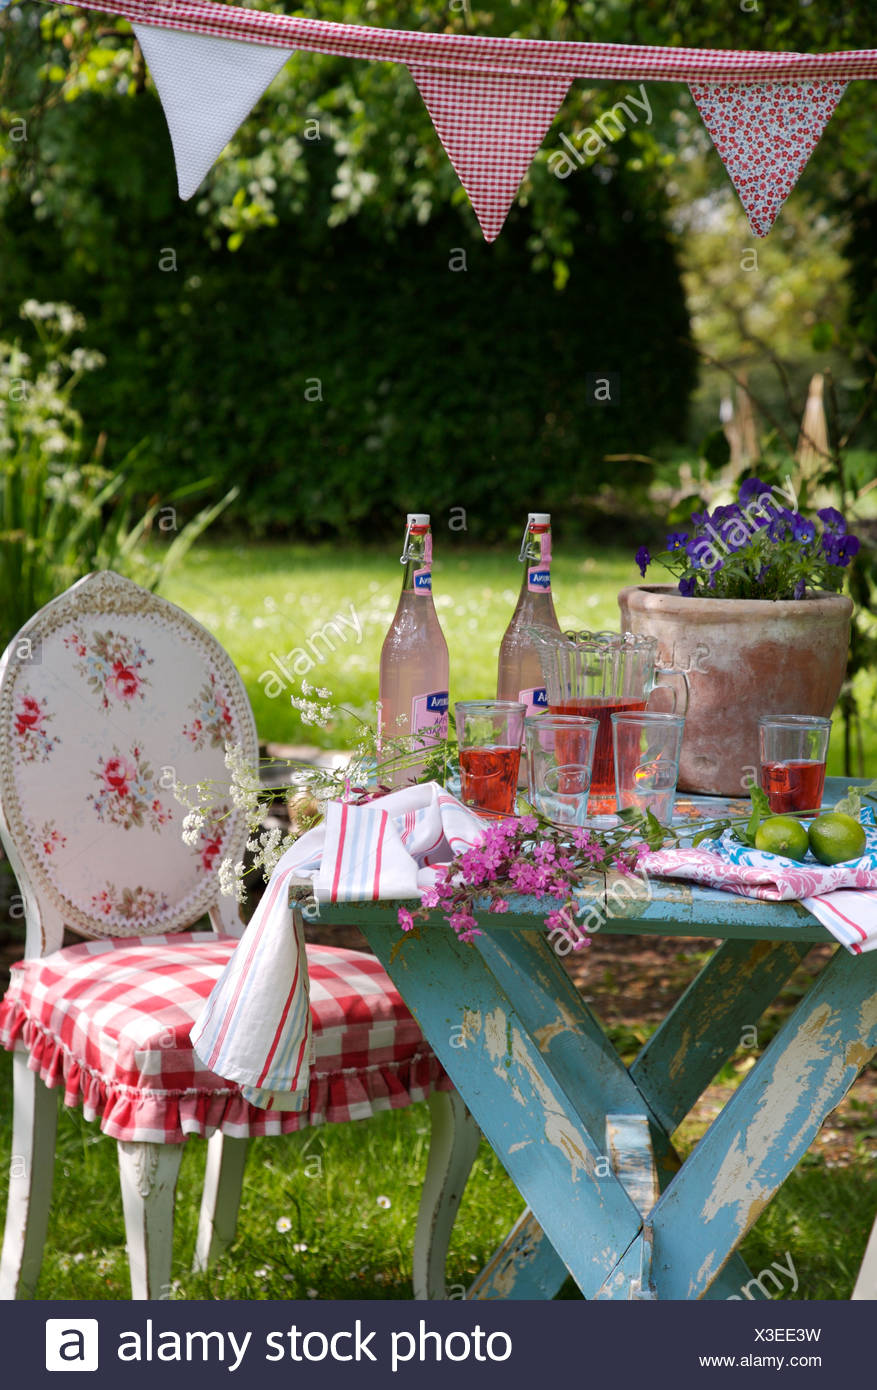 Summer Garden With Blue Painted Table Set For Lunch With Bottles